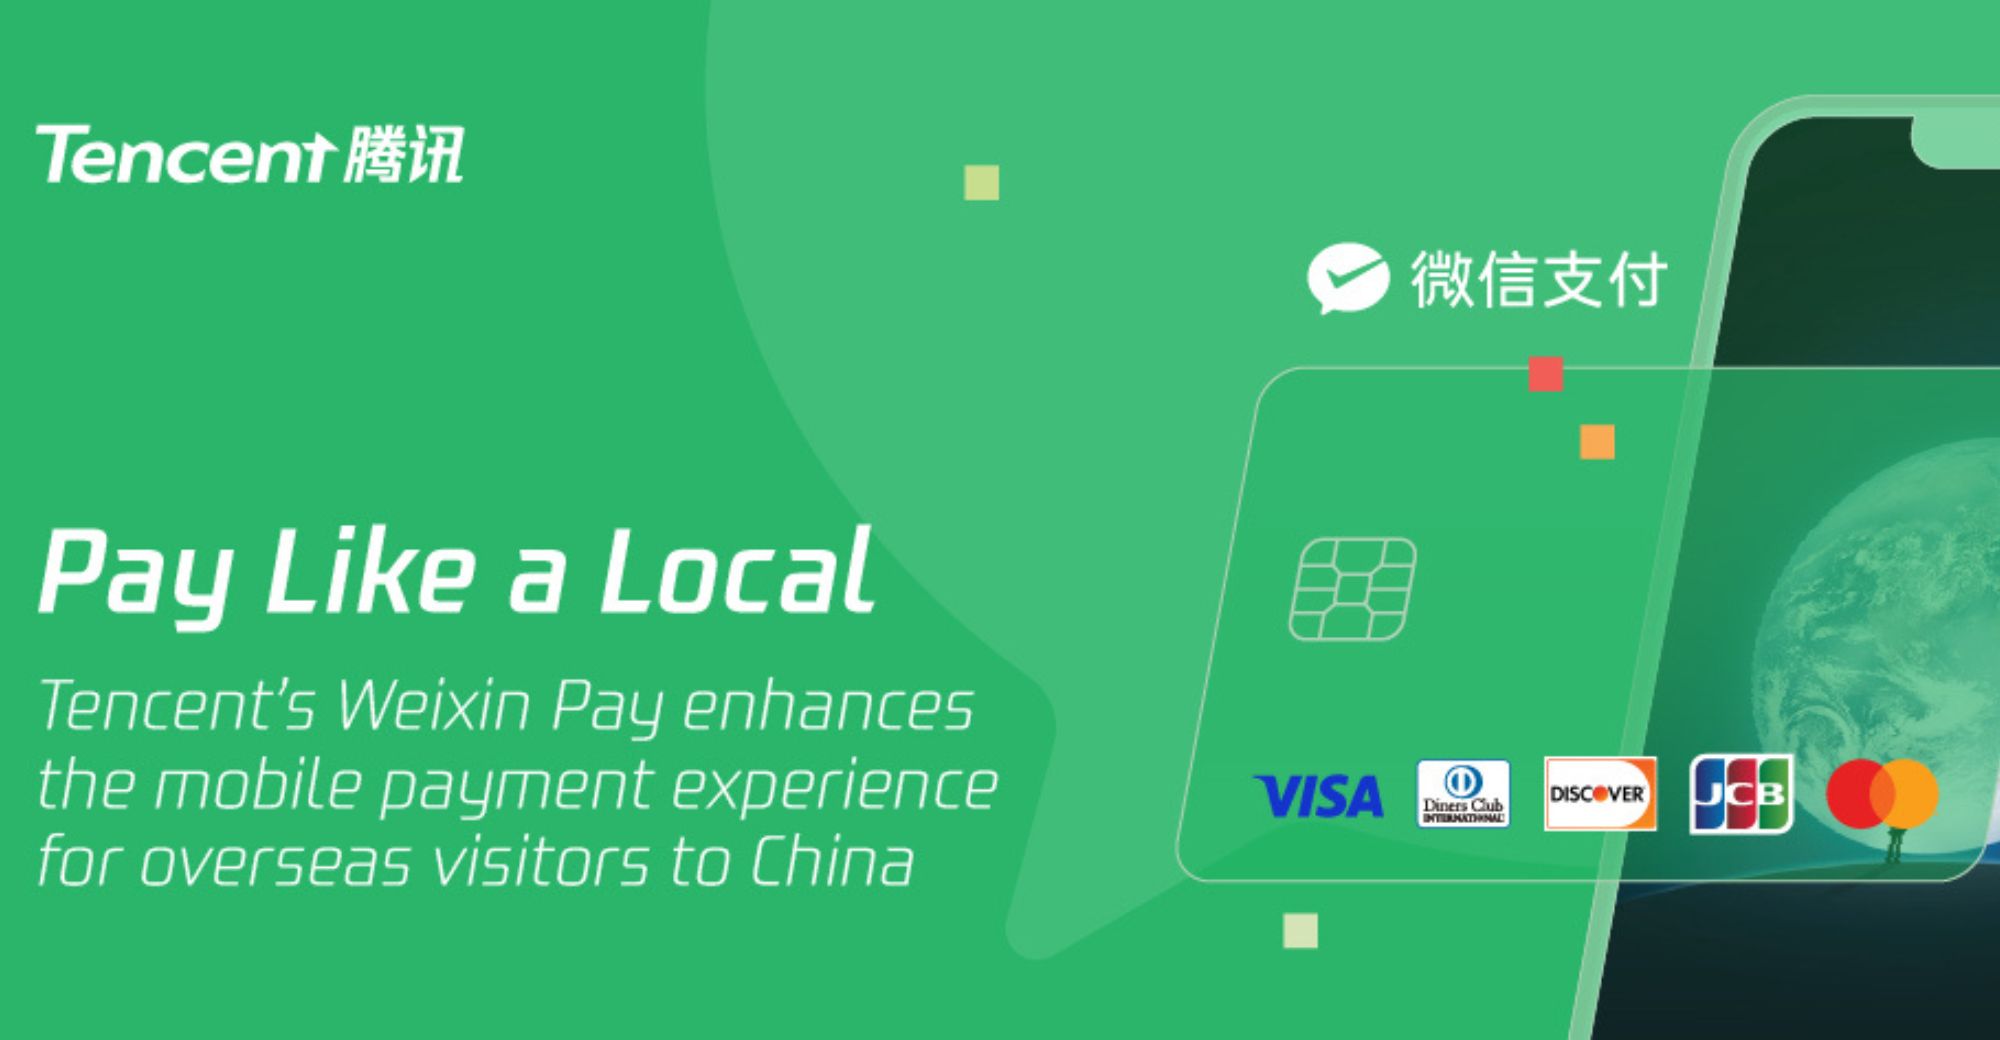 Tencent’s Weixin Pay Improves Mobile Payment for Foreign Visitors in China